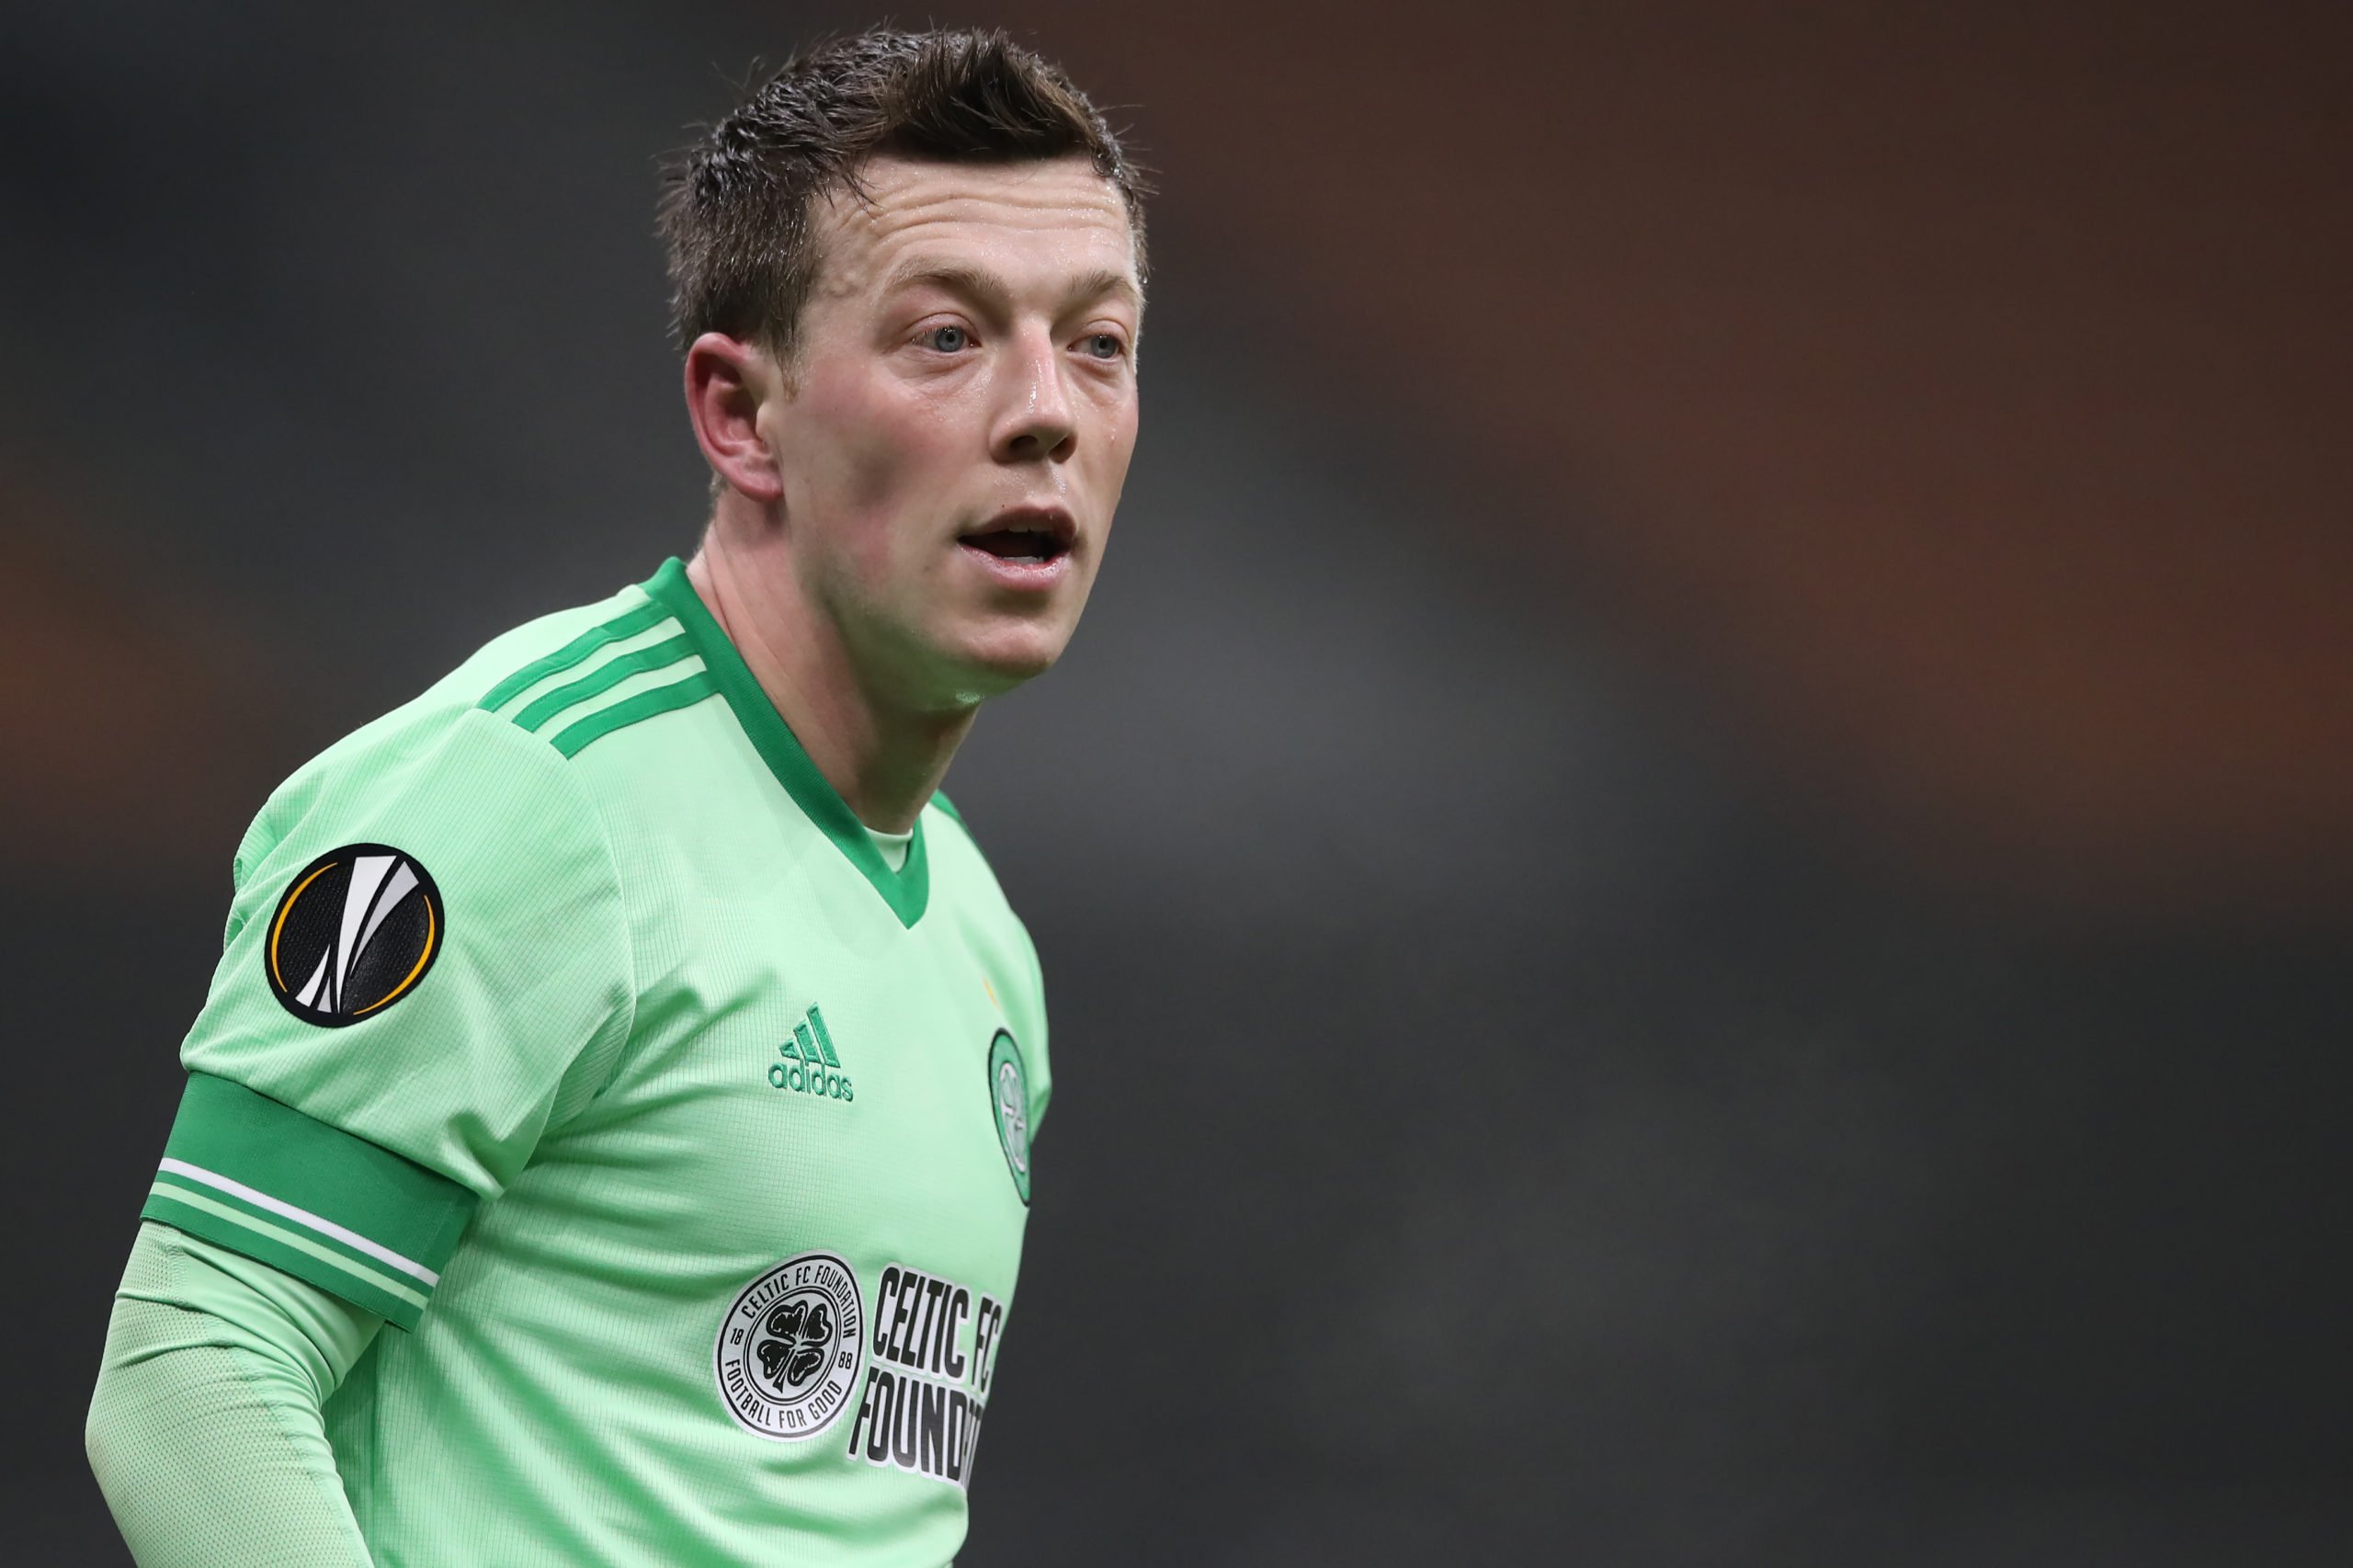 Paul Lambert expects Callum McGregor to lead Celtic by example, like Paul McStay